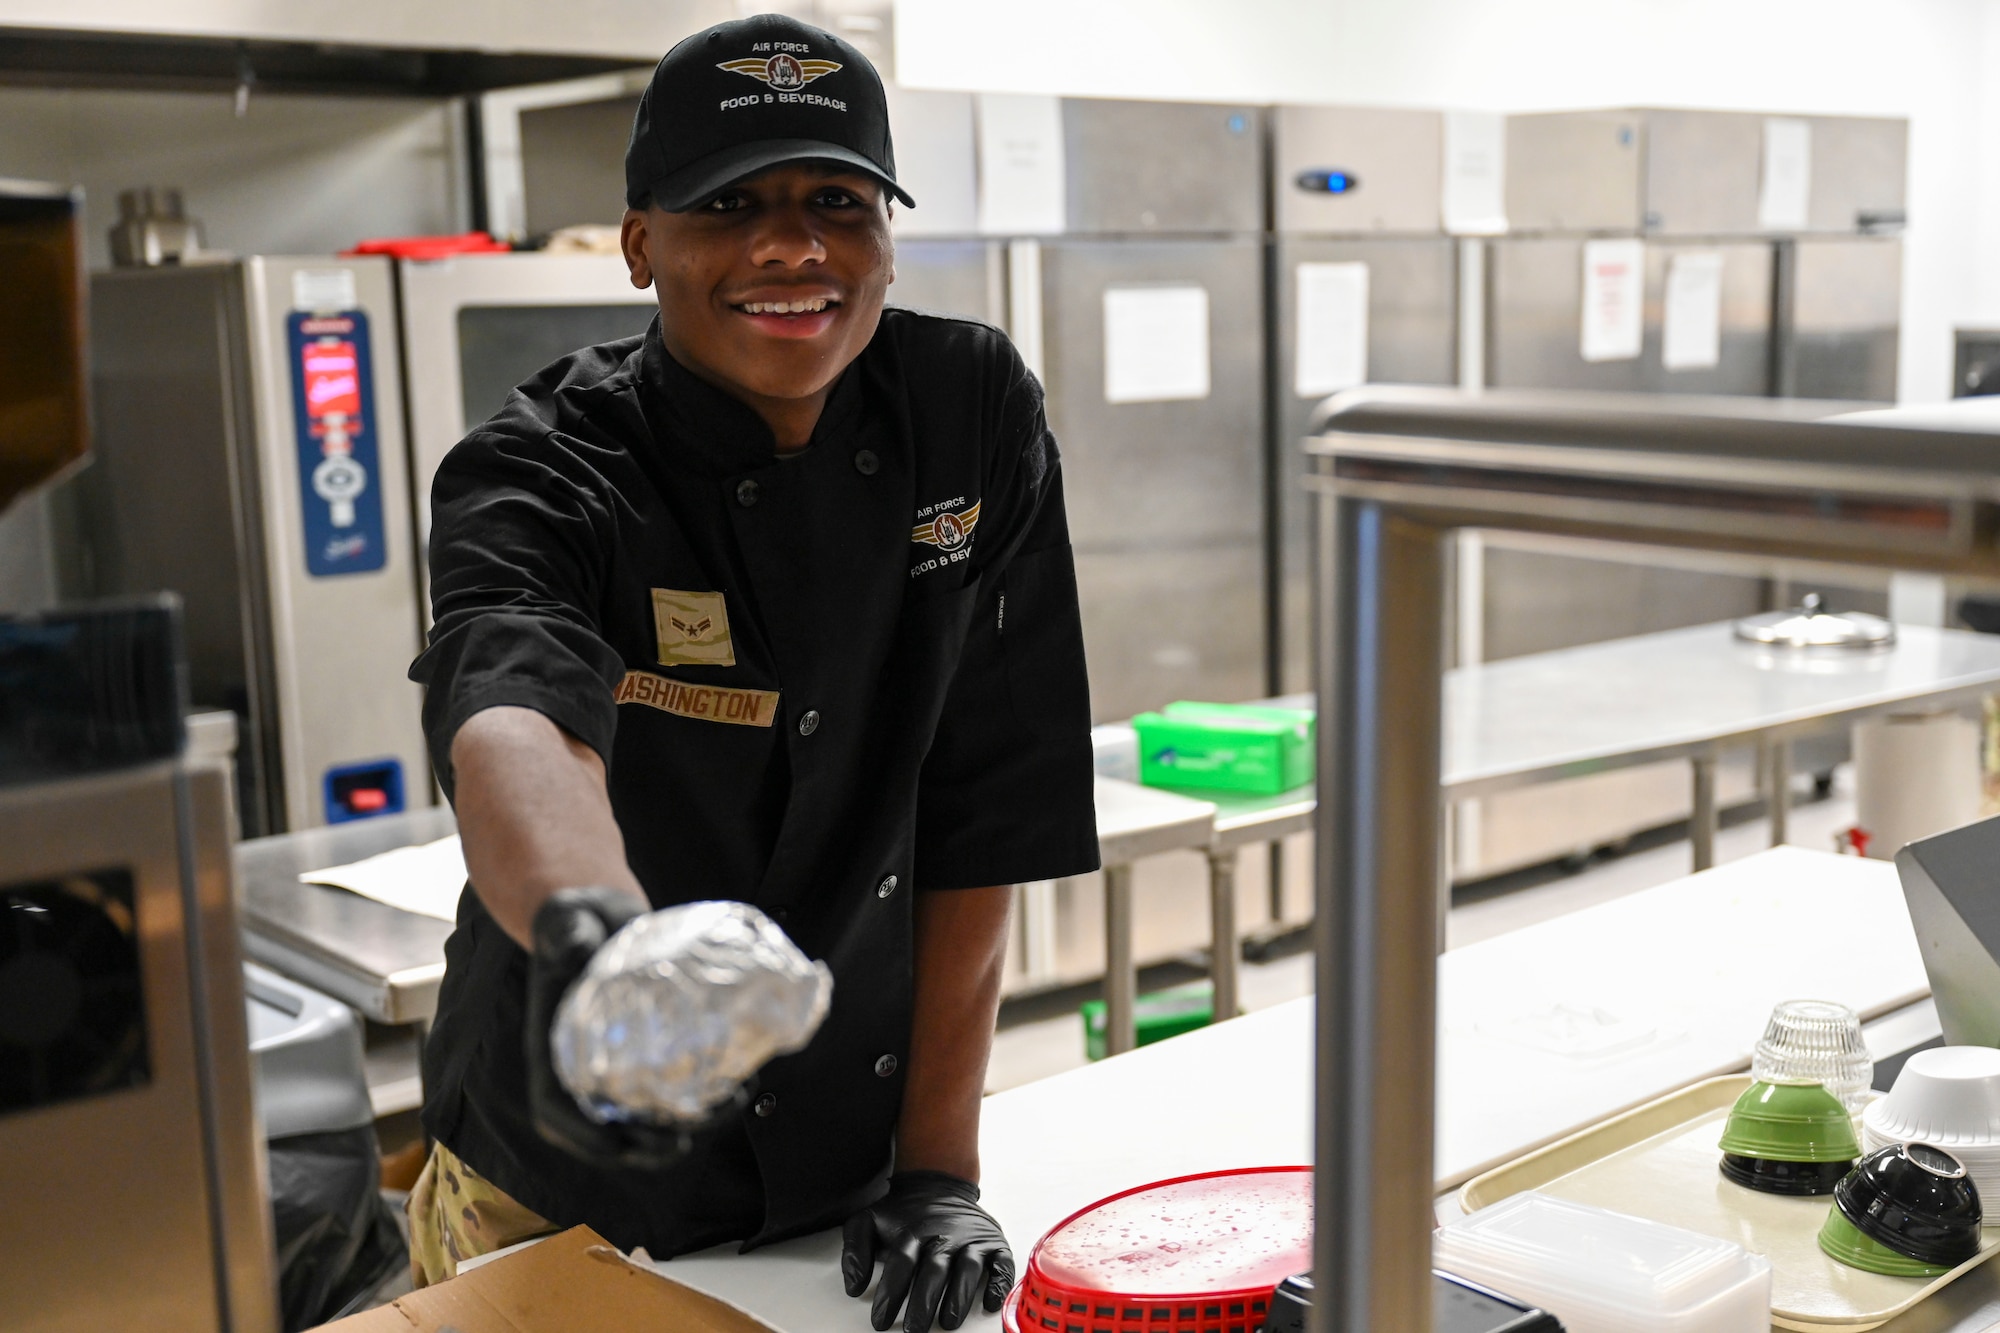 U.S. Air Force Airman 1st Class Jordan Washington, 49th Force Support Squadron food services apprentice, serves a 49er Cafe breakfast sandwich at Holloman Air Force Base, March 21, 2024. The 49er Cafe, located within Club Holloman, launched a new breakfast and lunch menu with a selection of salads, sandwiches, wraps, and grab-and-go items that provide everyone with easy and healthful options. (U.S. Air Force photo by Airman 1st Class Michelle Ferrari)